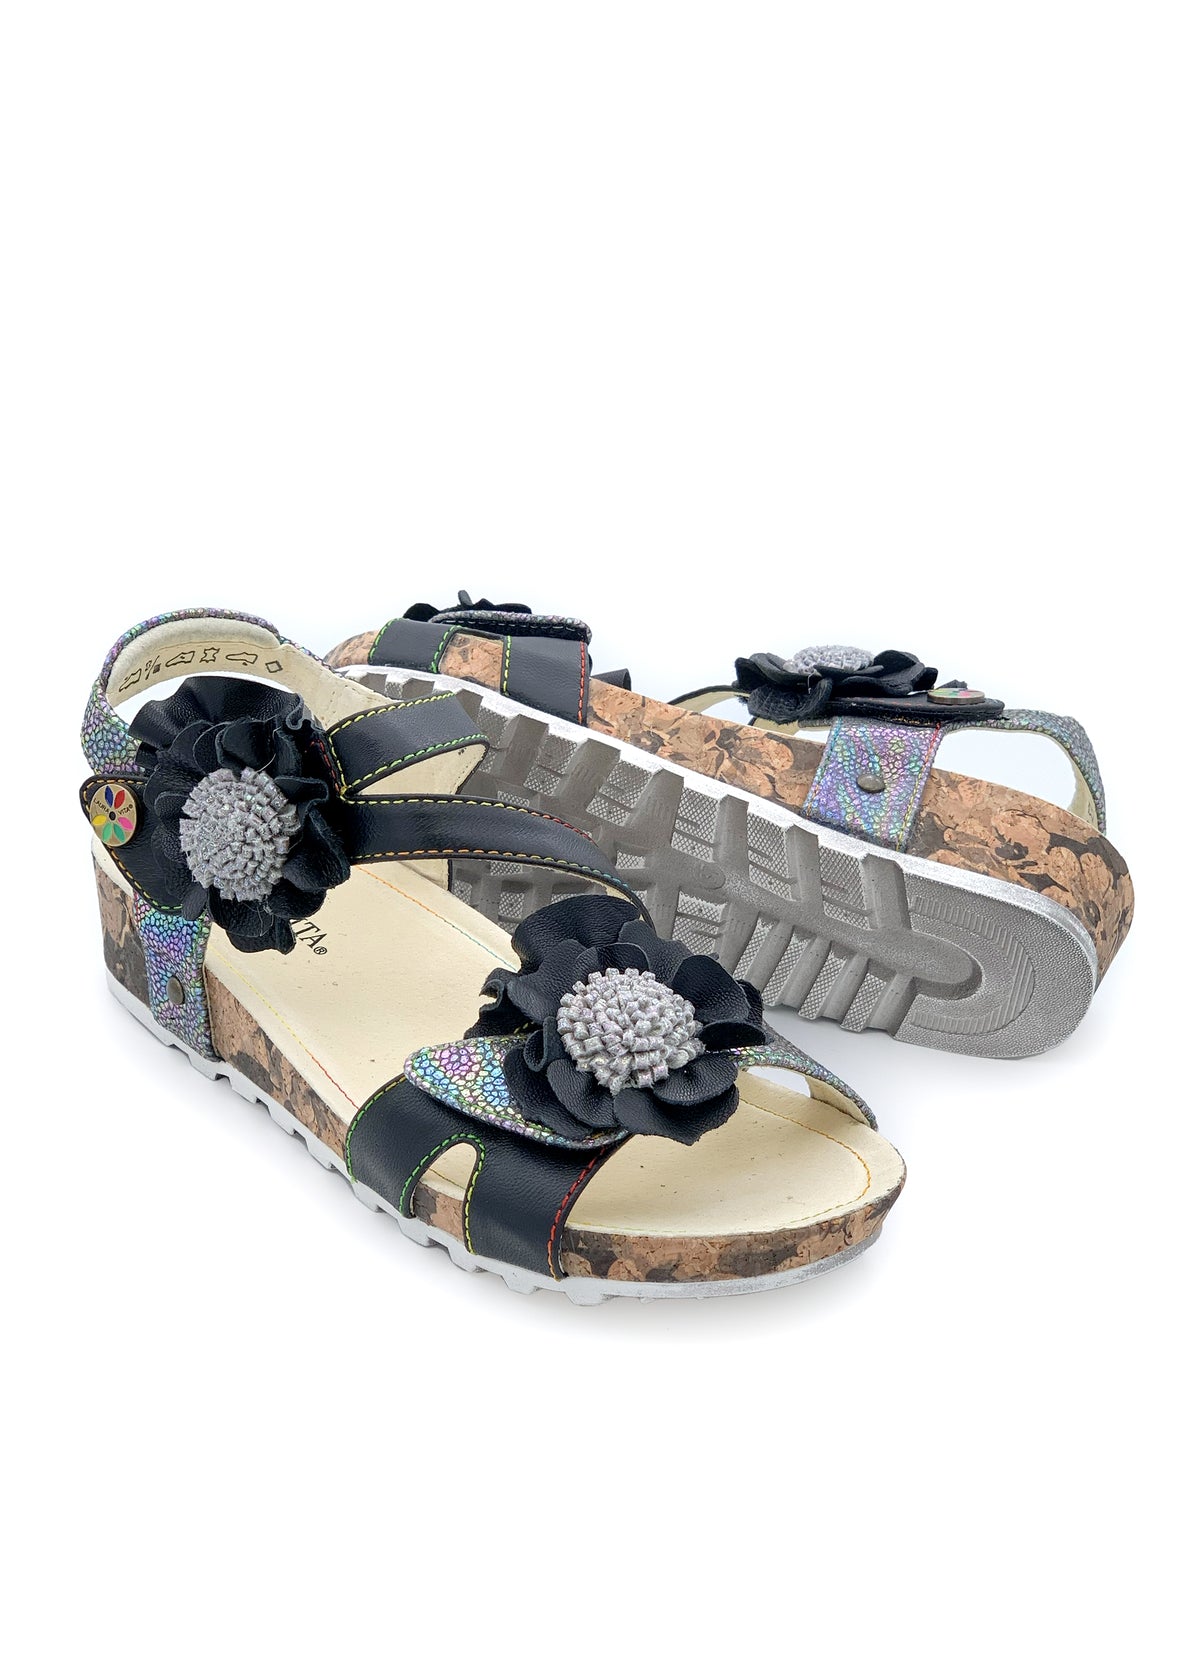 Rose sandals - Brcyano 68, black leather, silver patterns